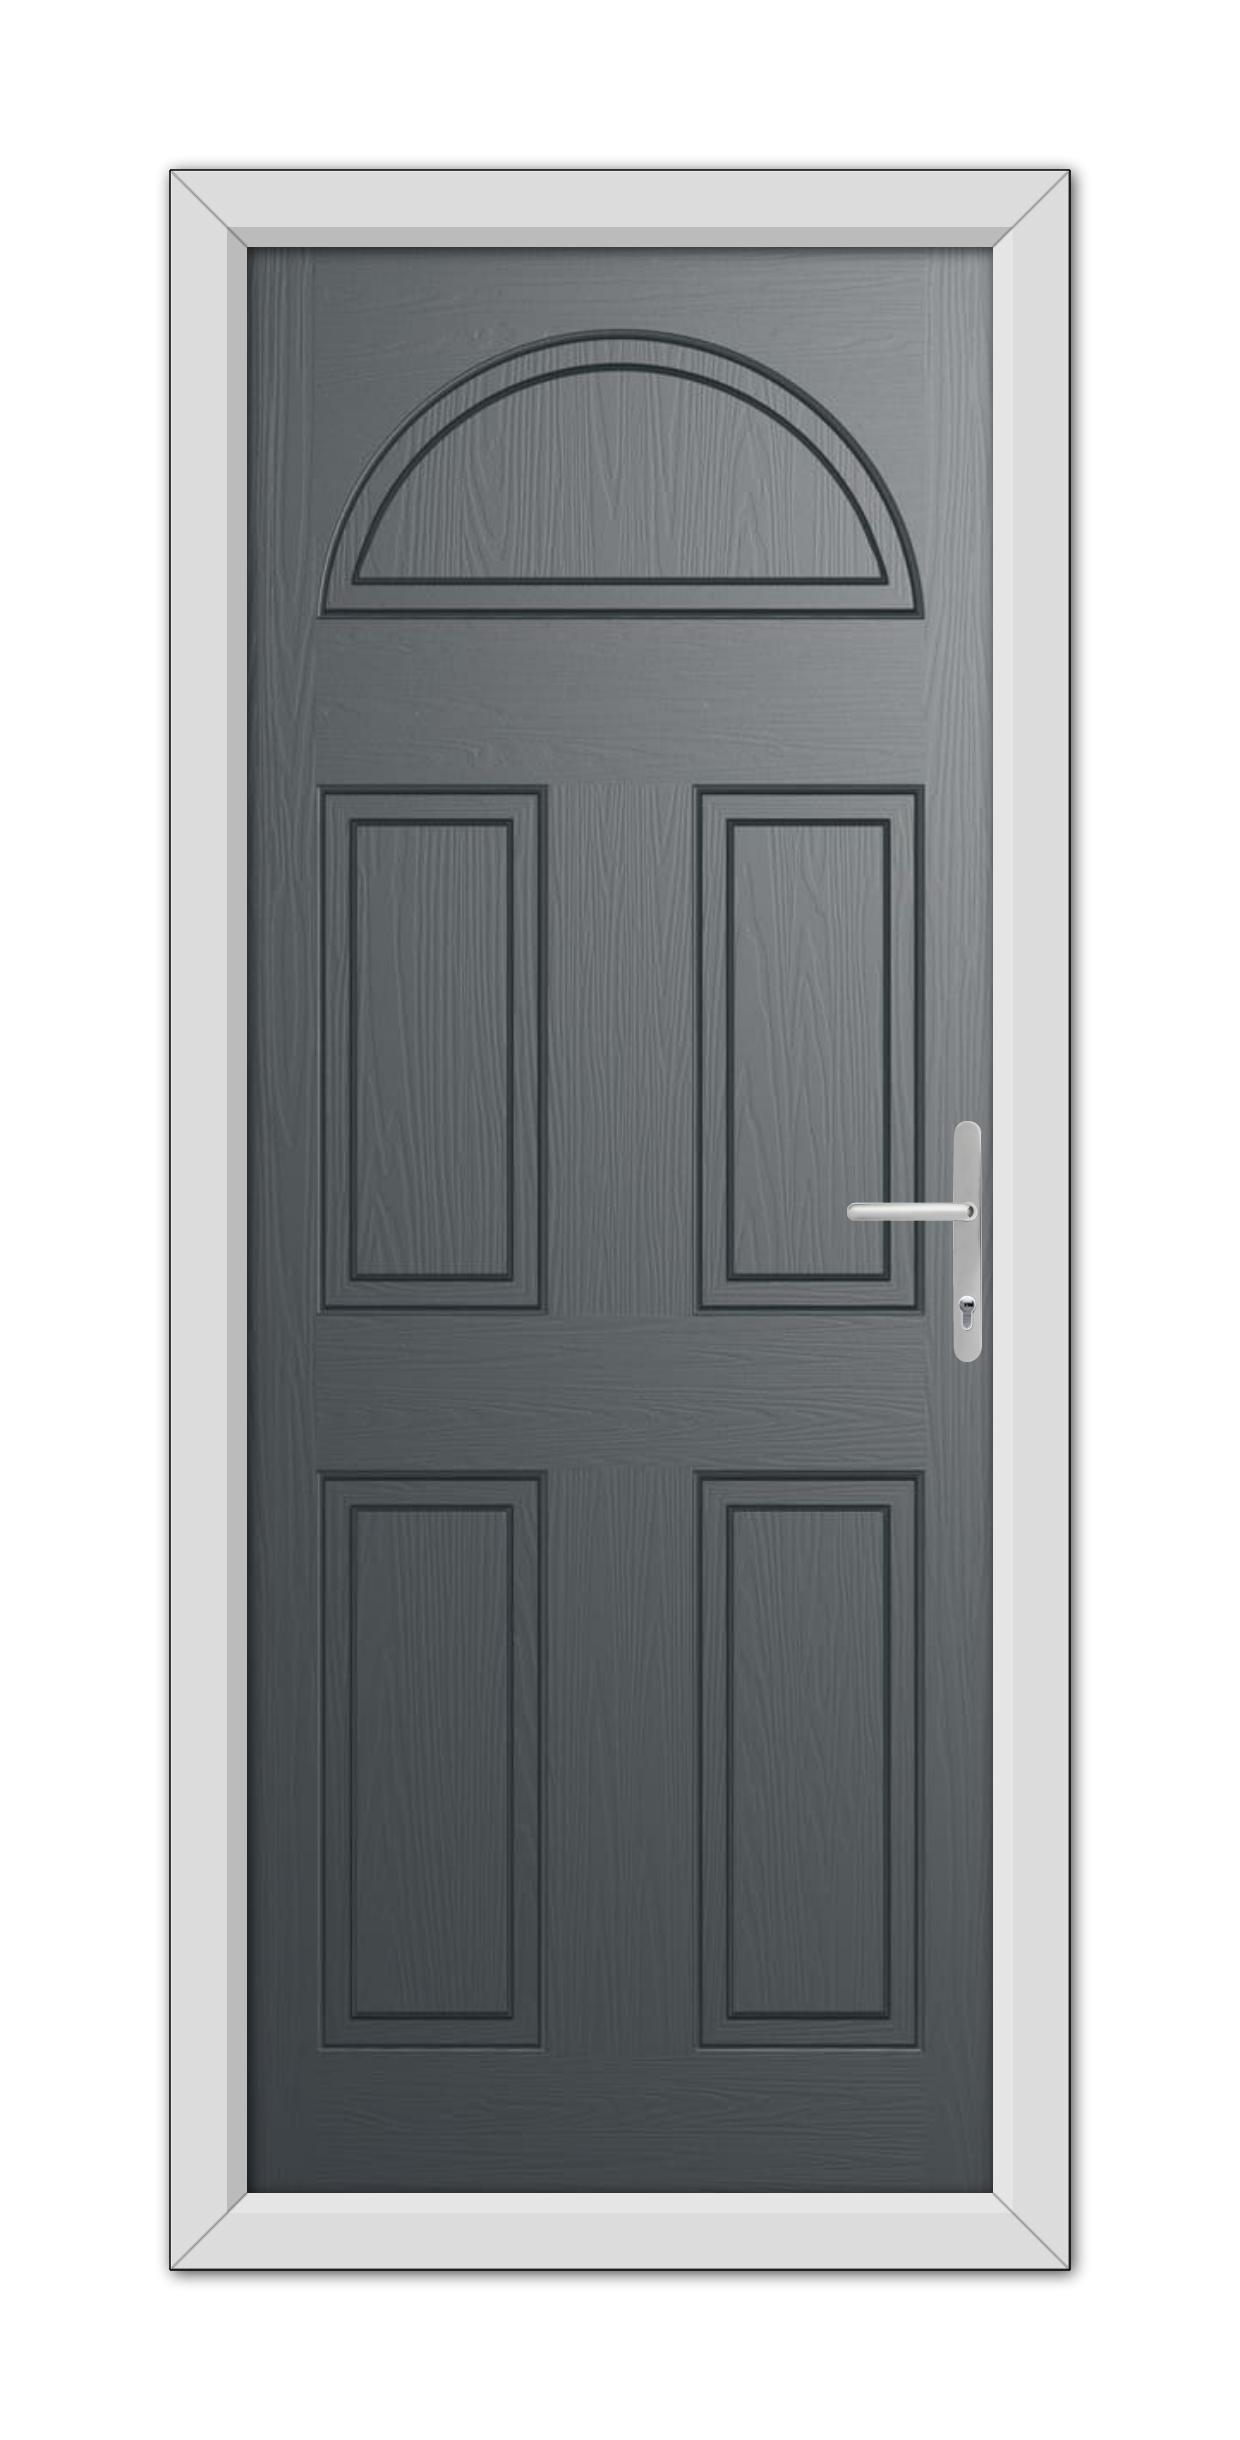 A modern Anthracite Grey Winslow solid composite door featuring six panels and a semicircular translucent window above, fitted with a white metal handle.